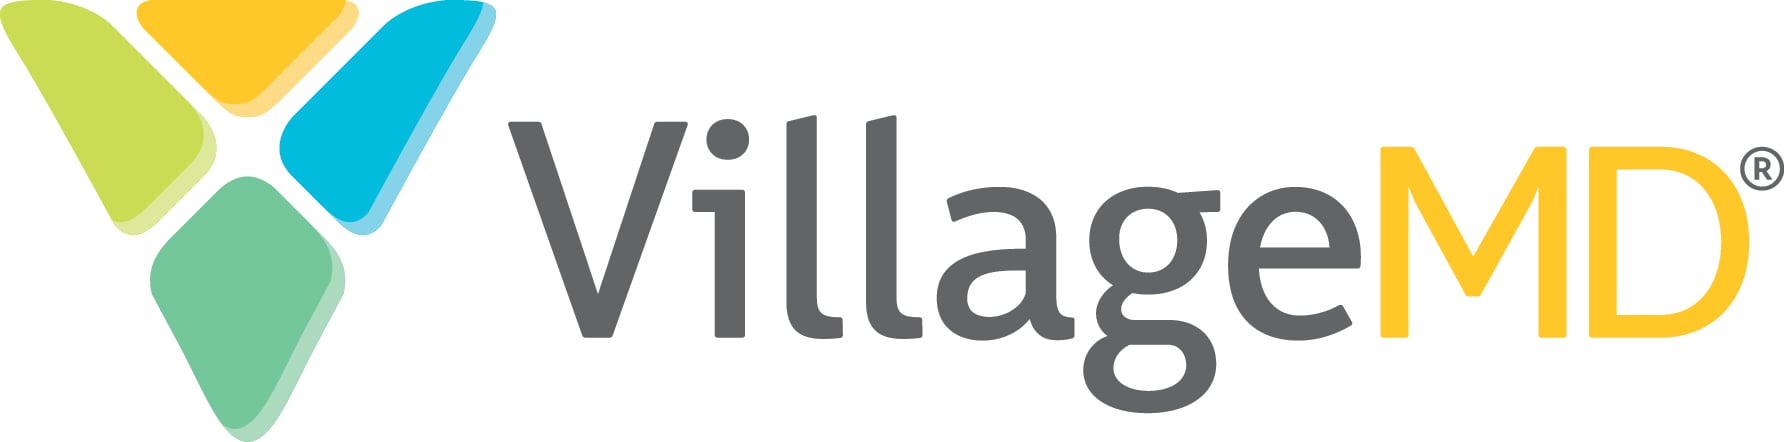 VillageMD Opens Village Medical Primary Care Clinic in Pearland